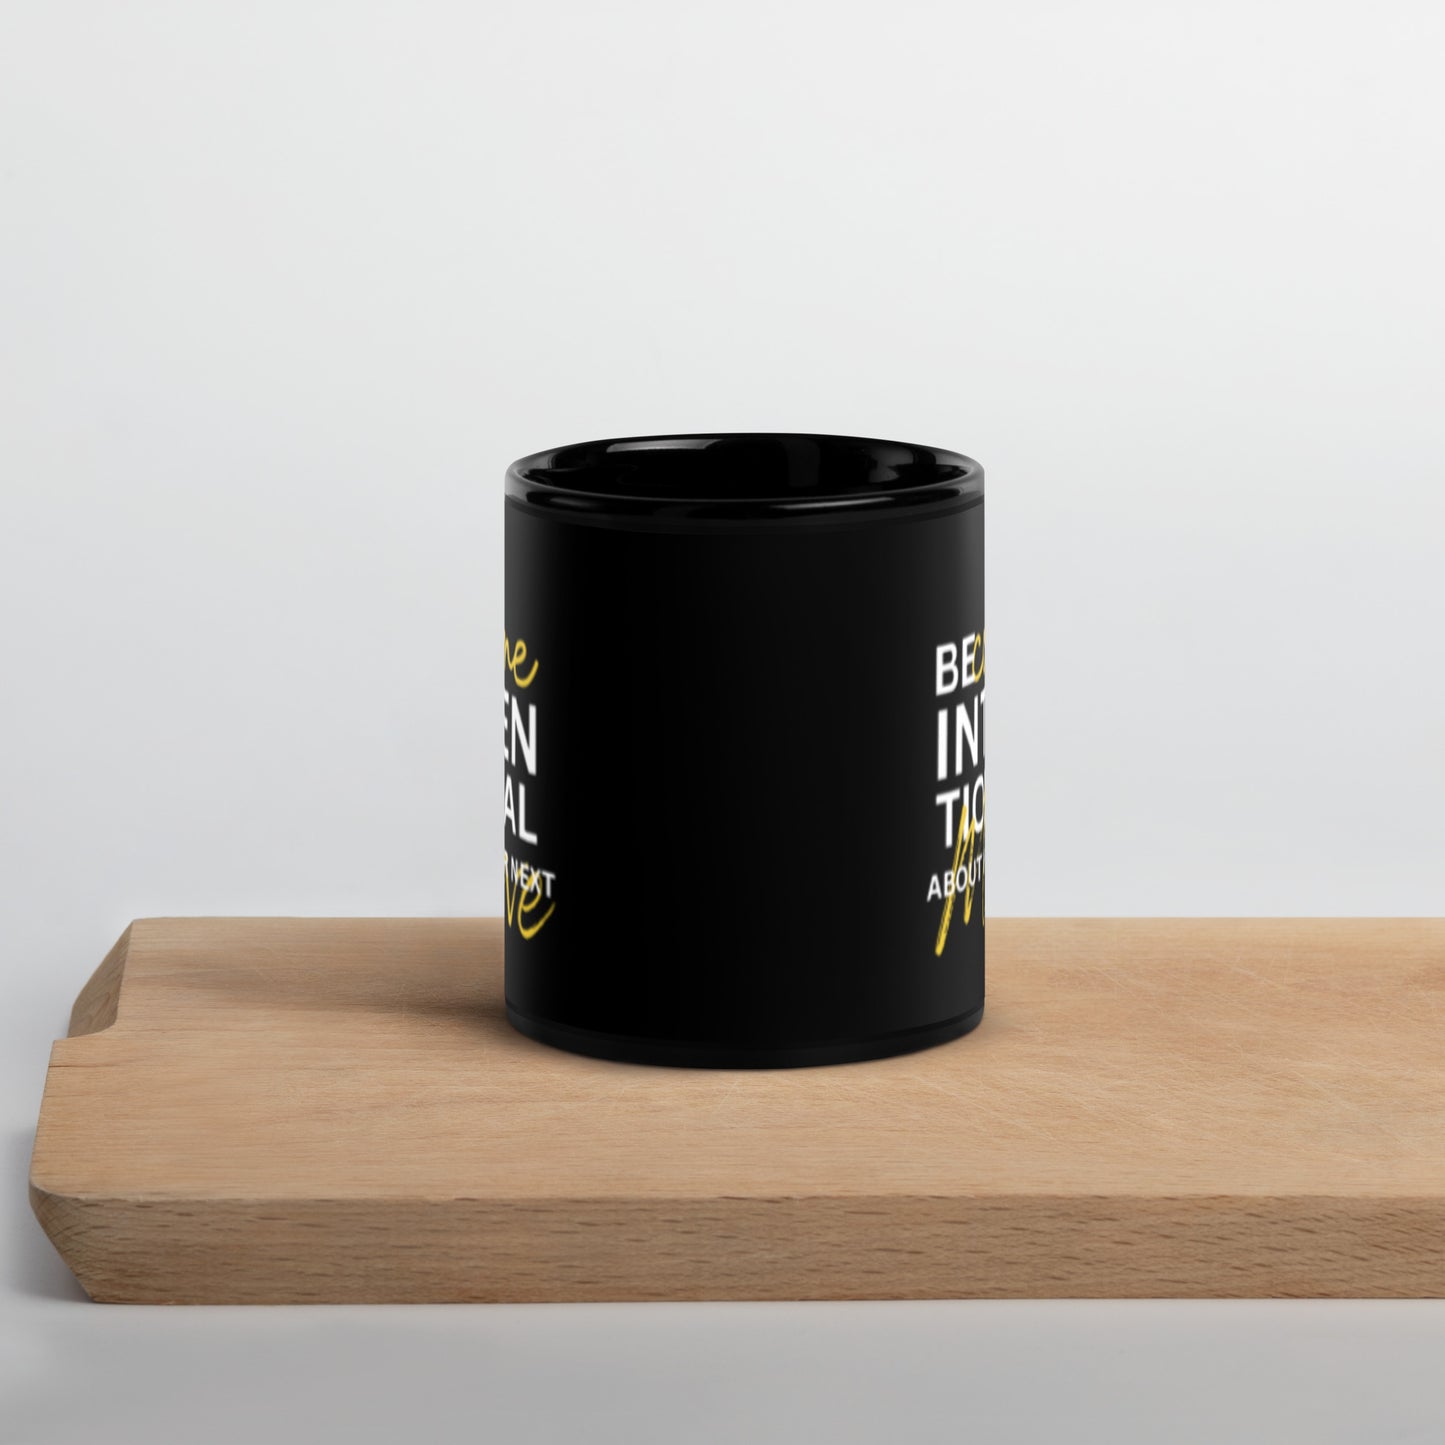 BECOME INTENTIONAL ABOUT YOUR NEXT MOVE - Black Glossy Mug